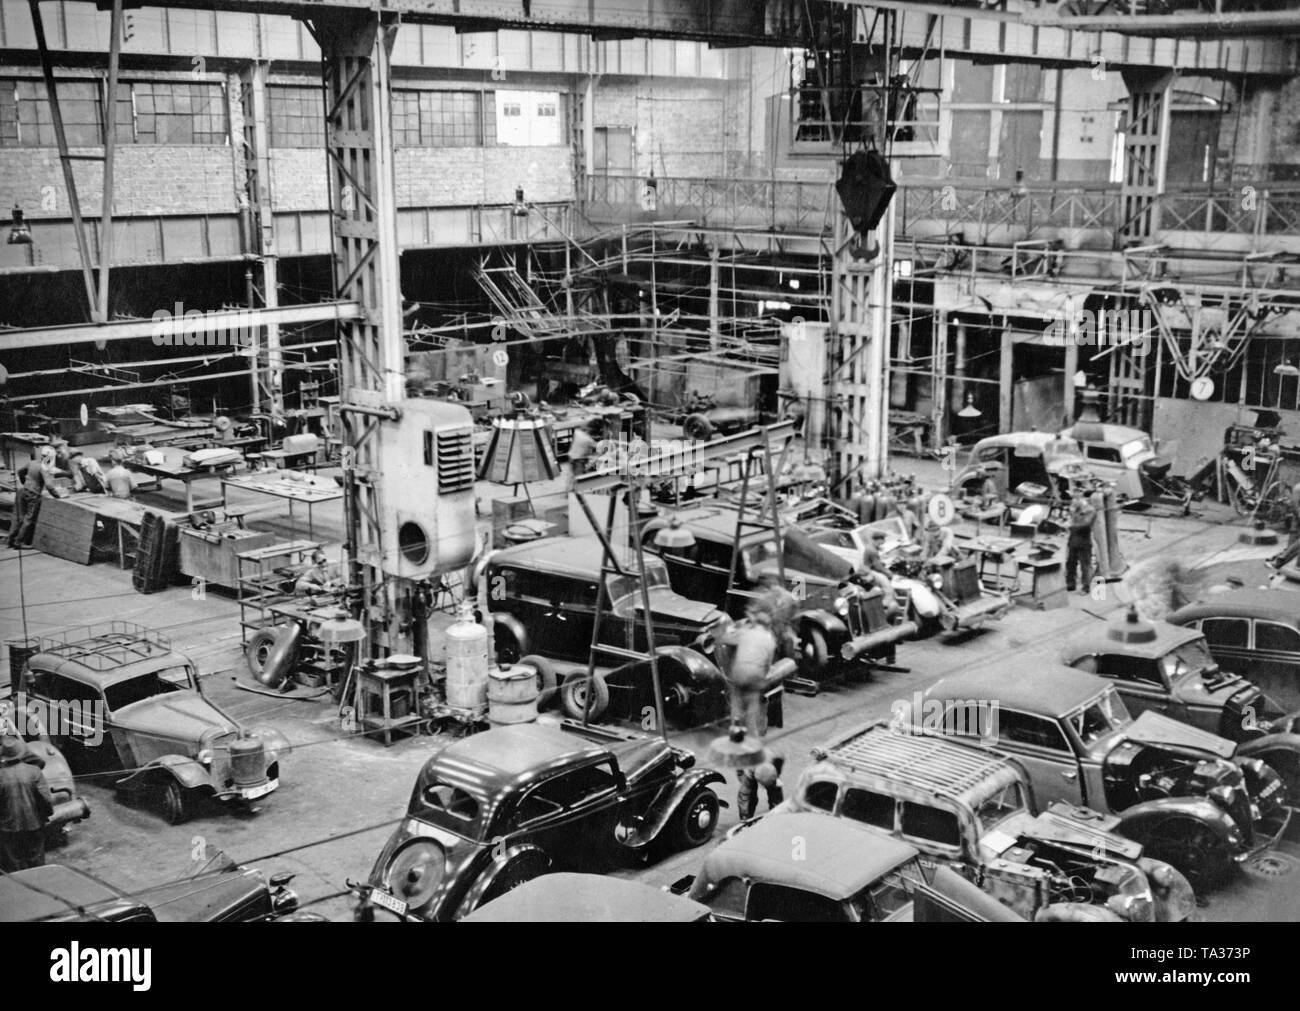 In 1945 the Adlerwerke received through the American military government permission for the production of spare parts for automobiles, bicycles and typewriters. The picture shows a view of one of the former workshops with cars waiting to be repaired. Stock Photo